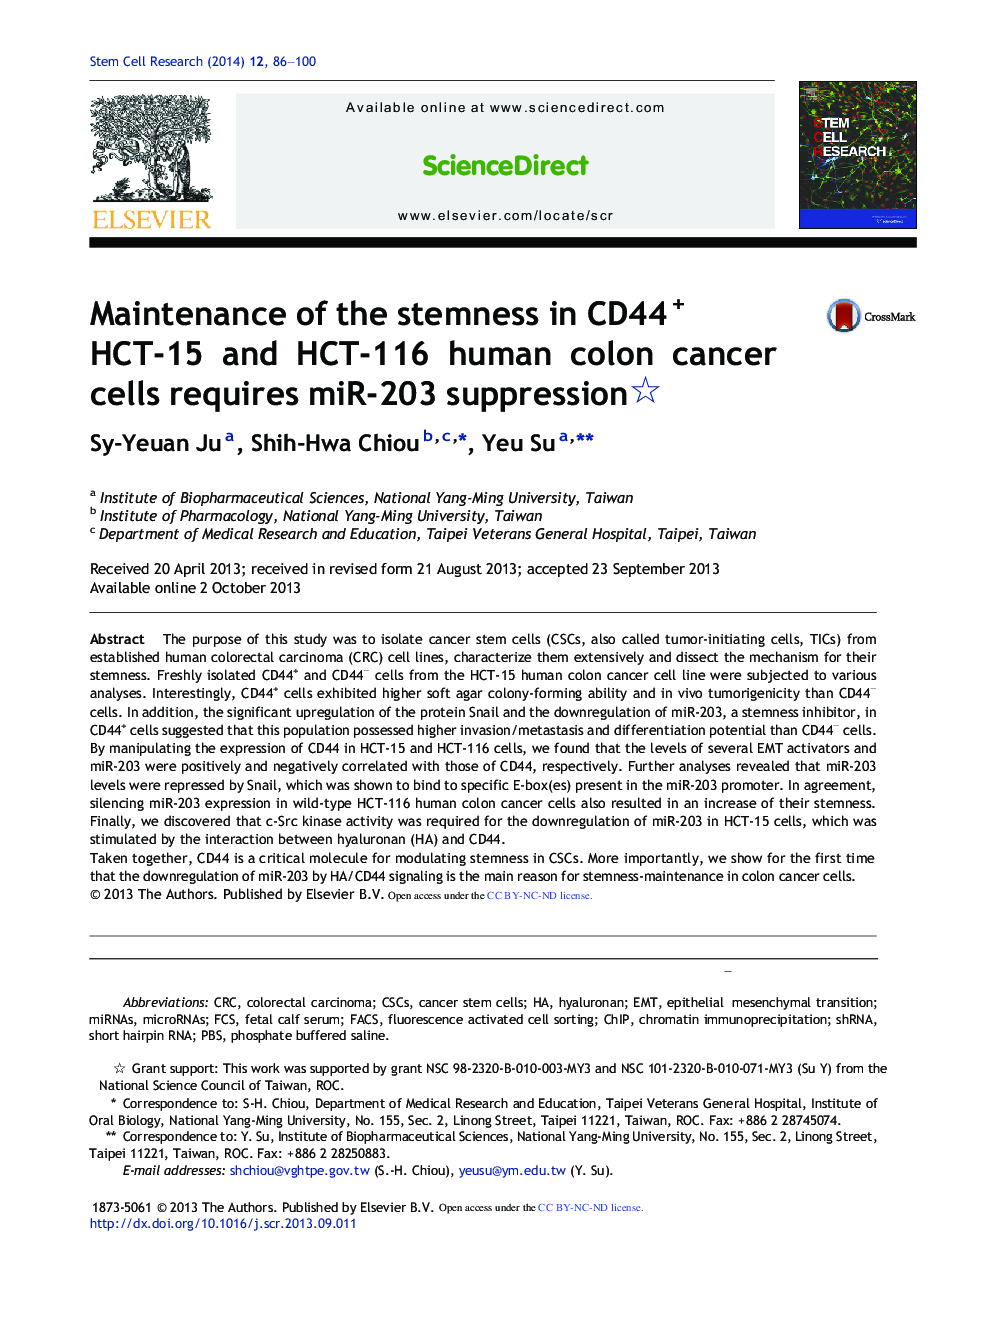 Maintenance of the stemness in CD44+ HCT-15 and HCT-116 human colon cancer cells requires miR-203 suppression 